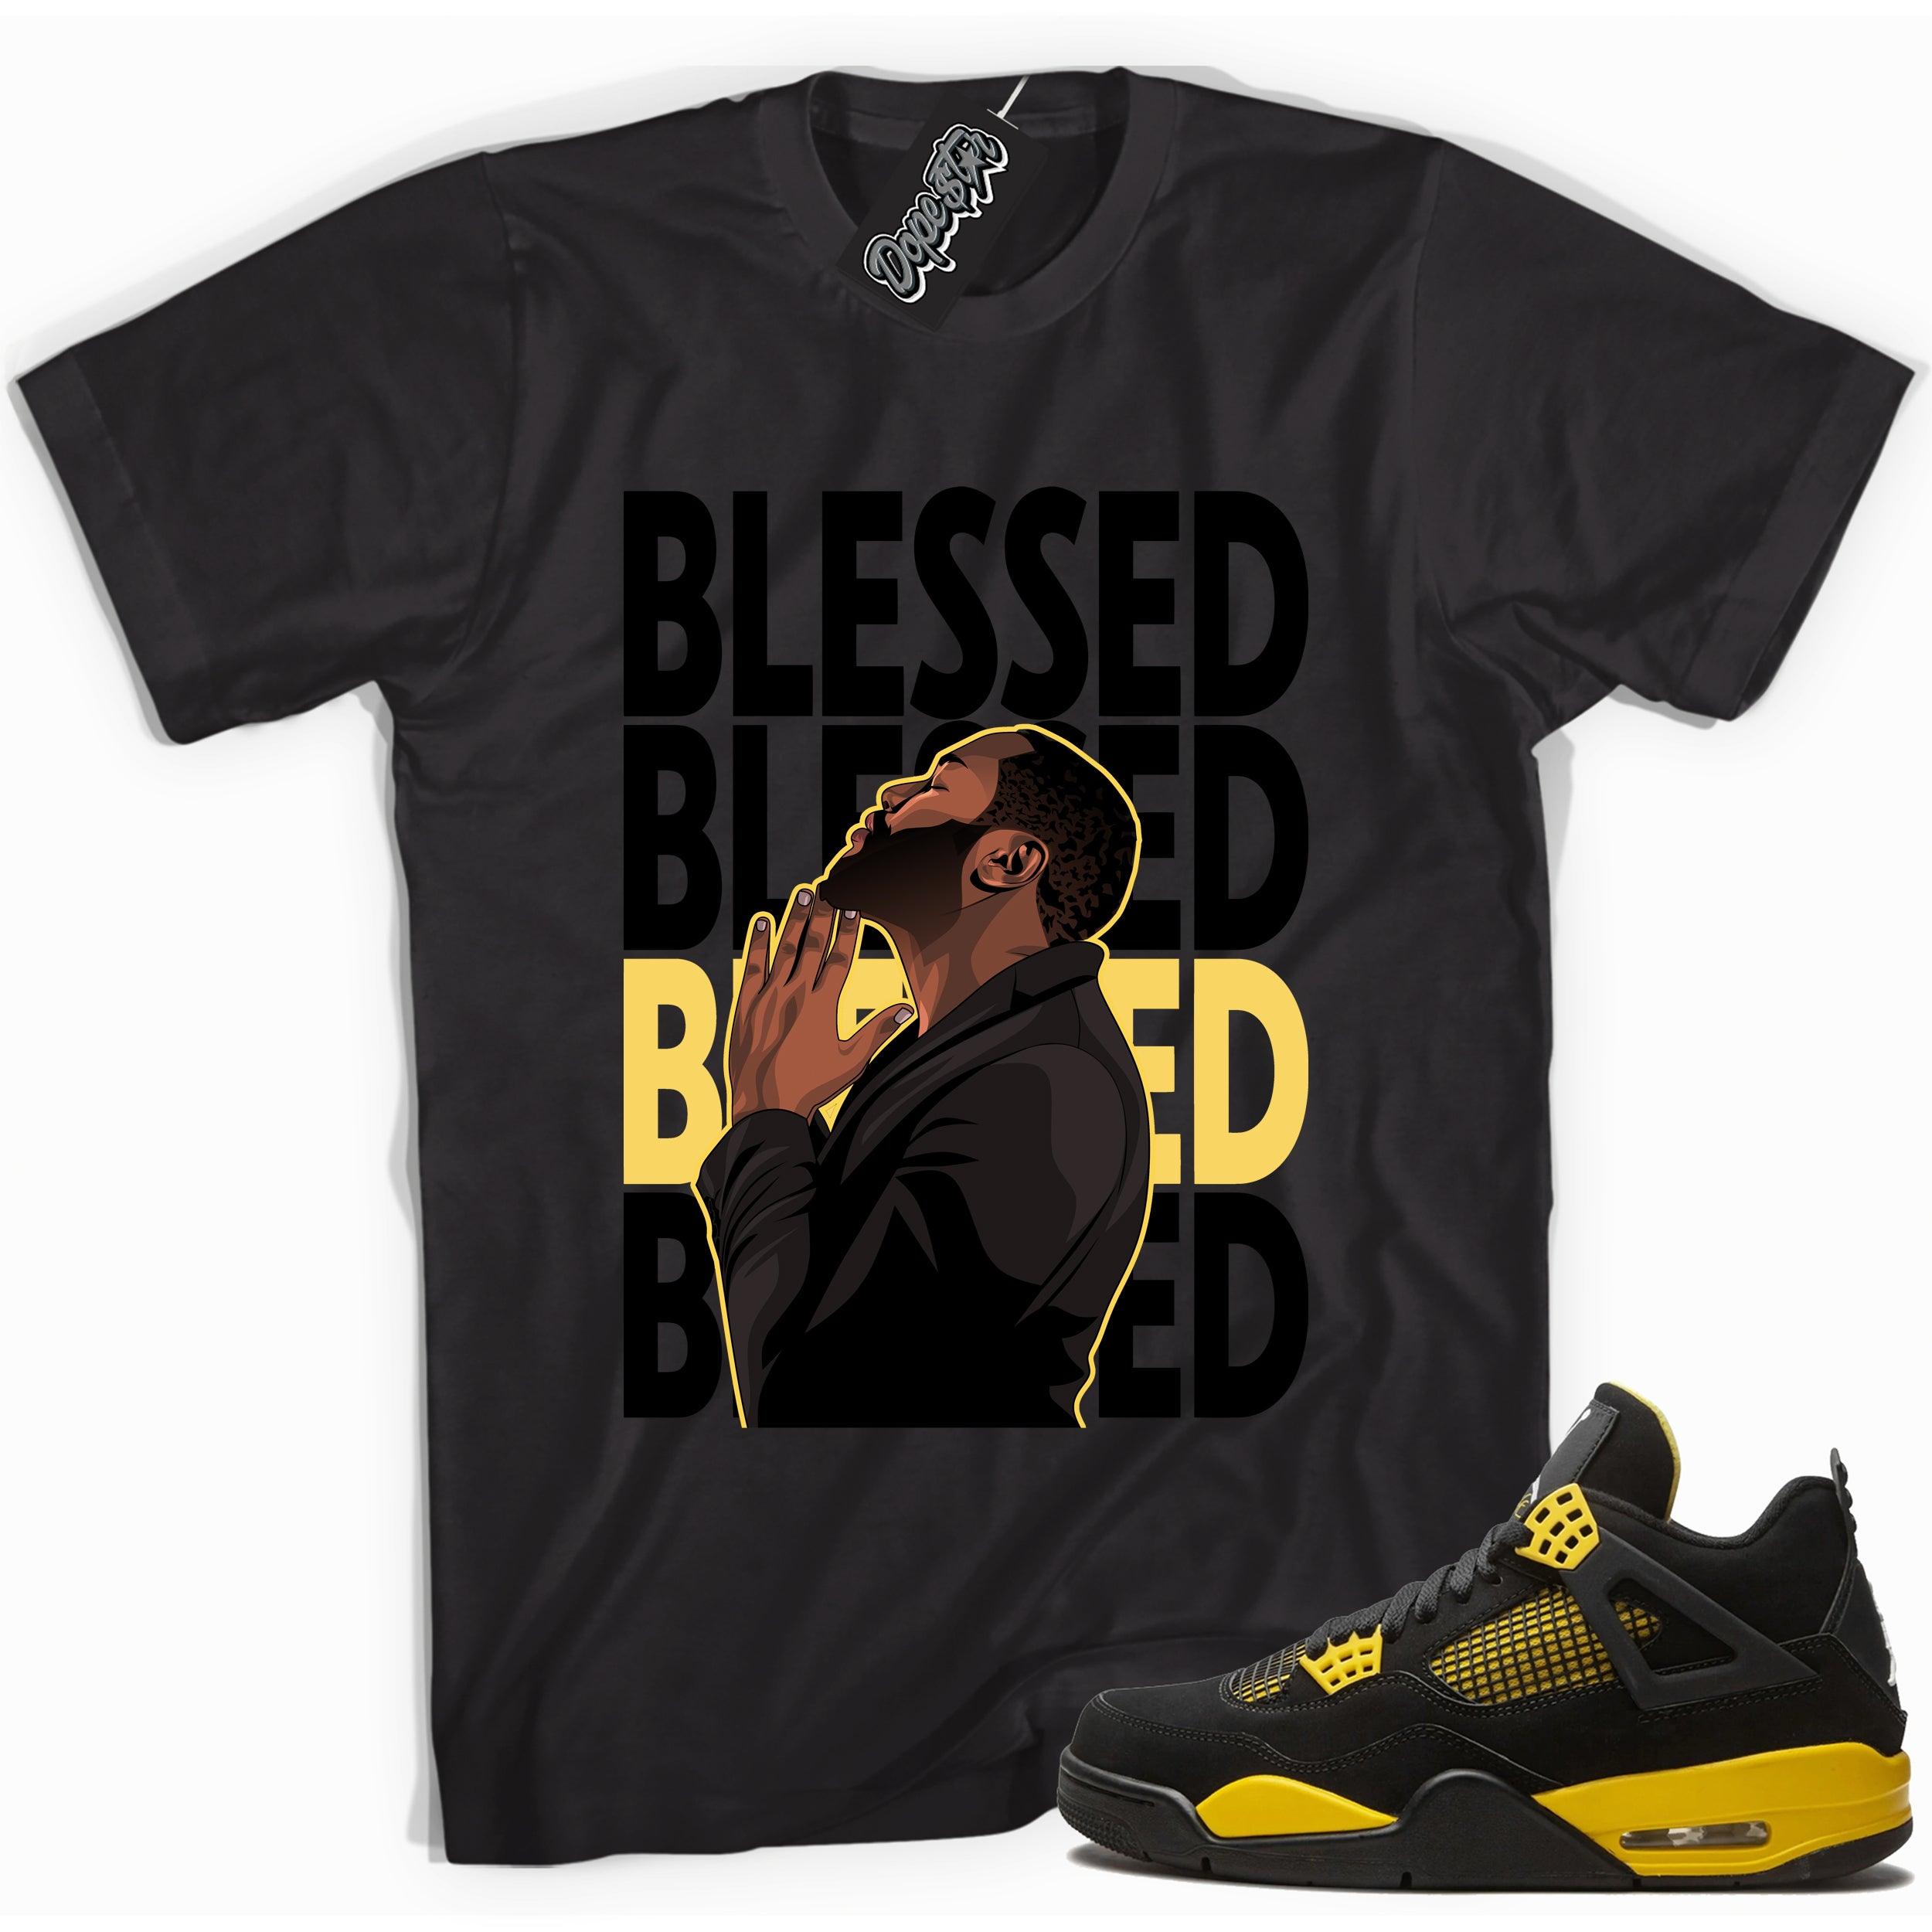 Cool black graphic tee with 'blessed king' print, that perfectly matches  Air Jordan 4 Thunder sneakers